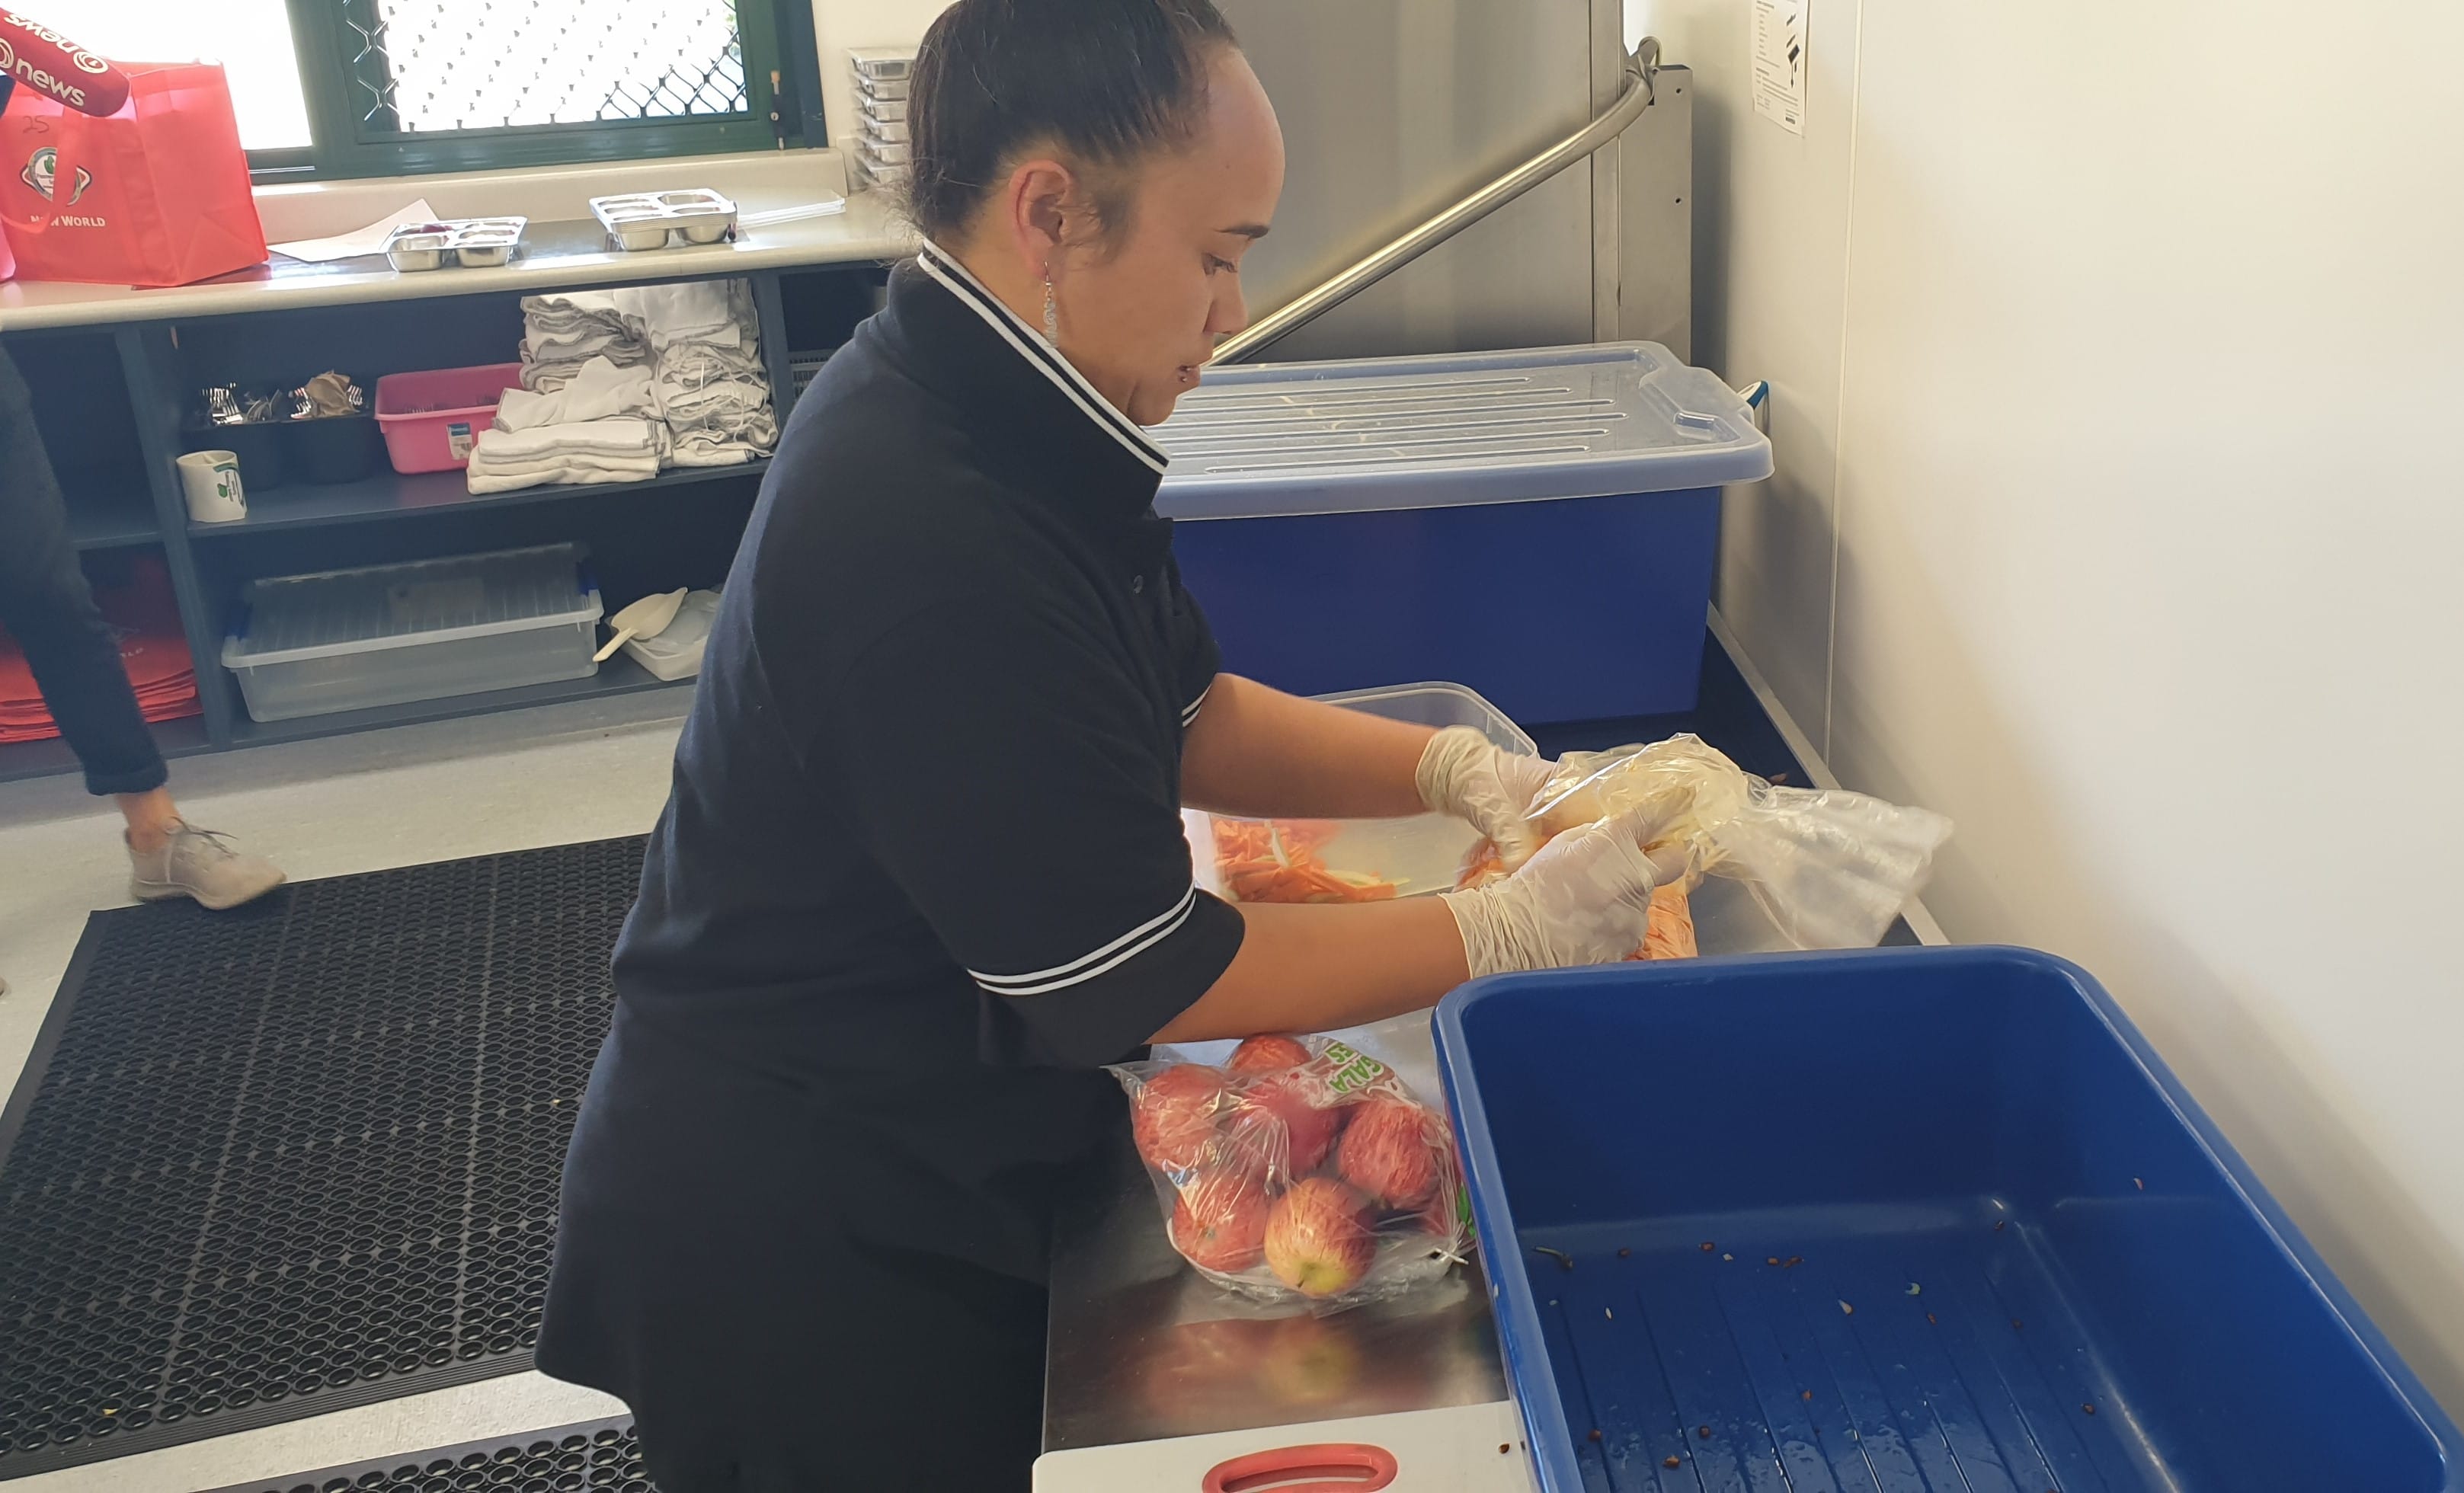 Parents put the meals into reusable bento boxes each morning, a task that provides paid jobs for 4 people.